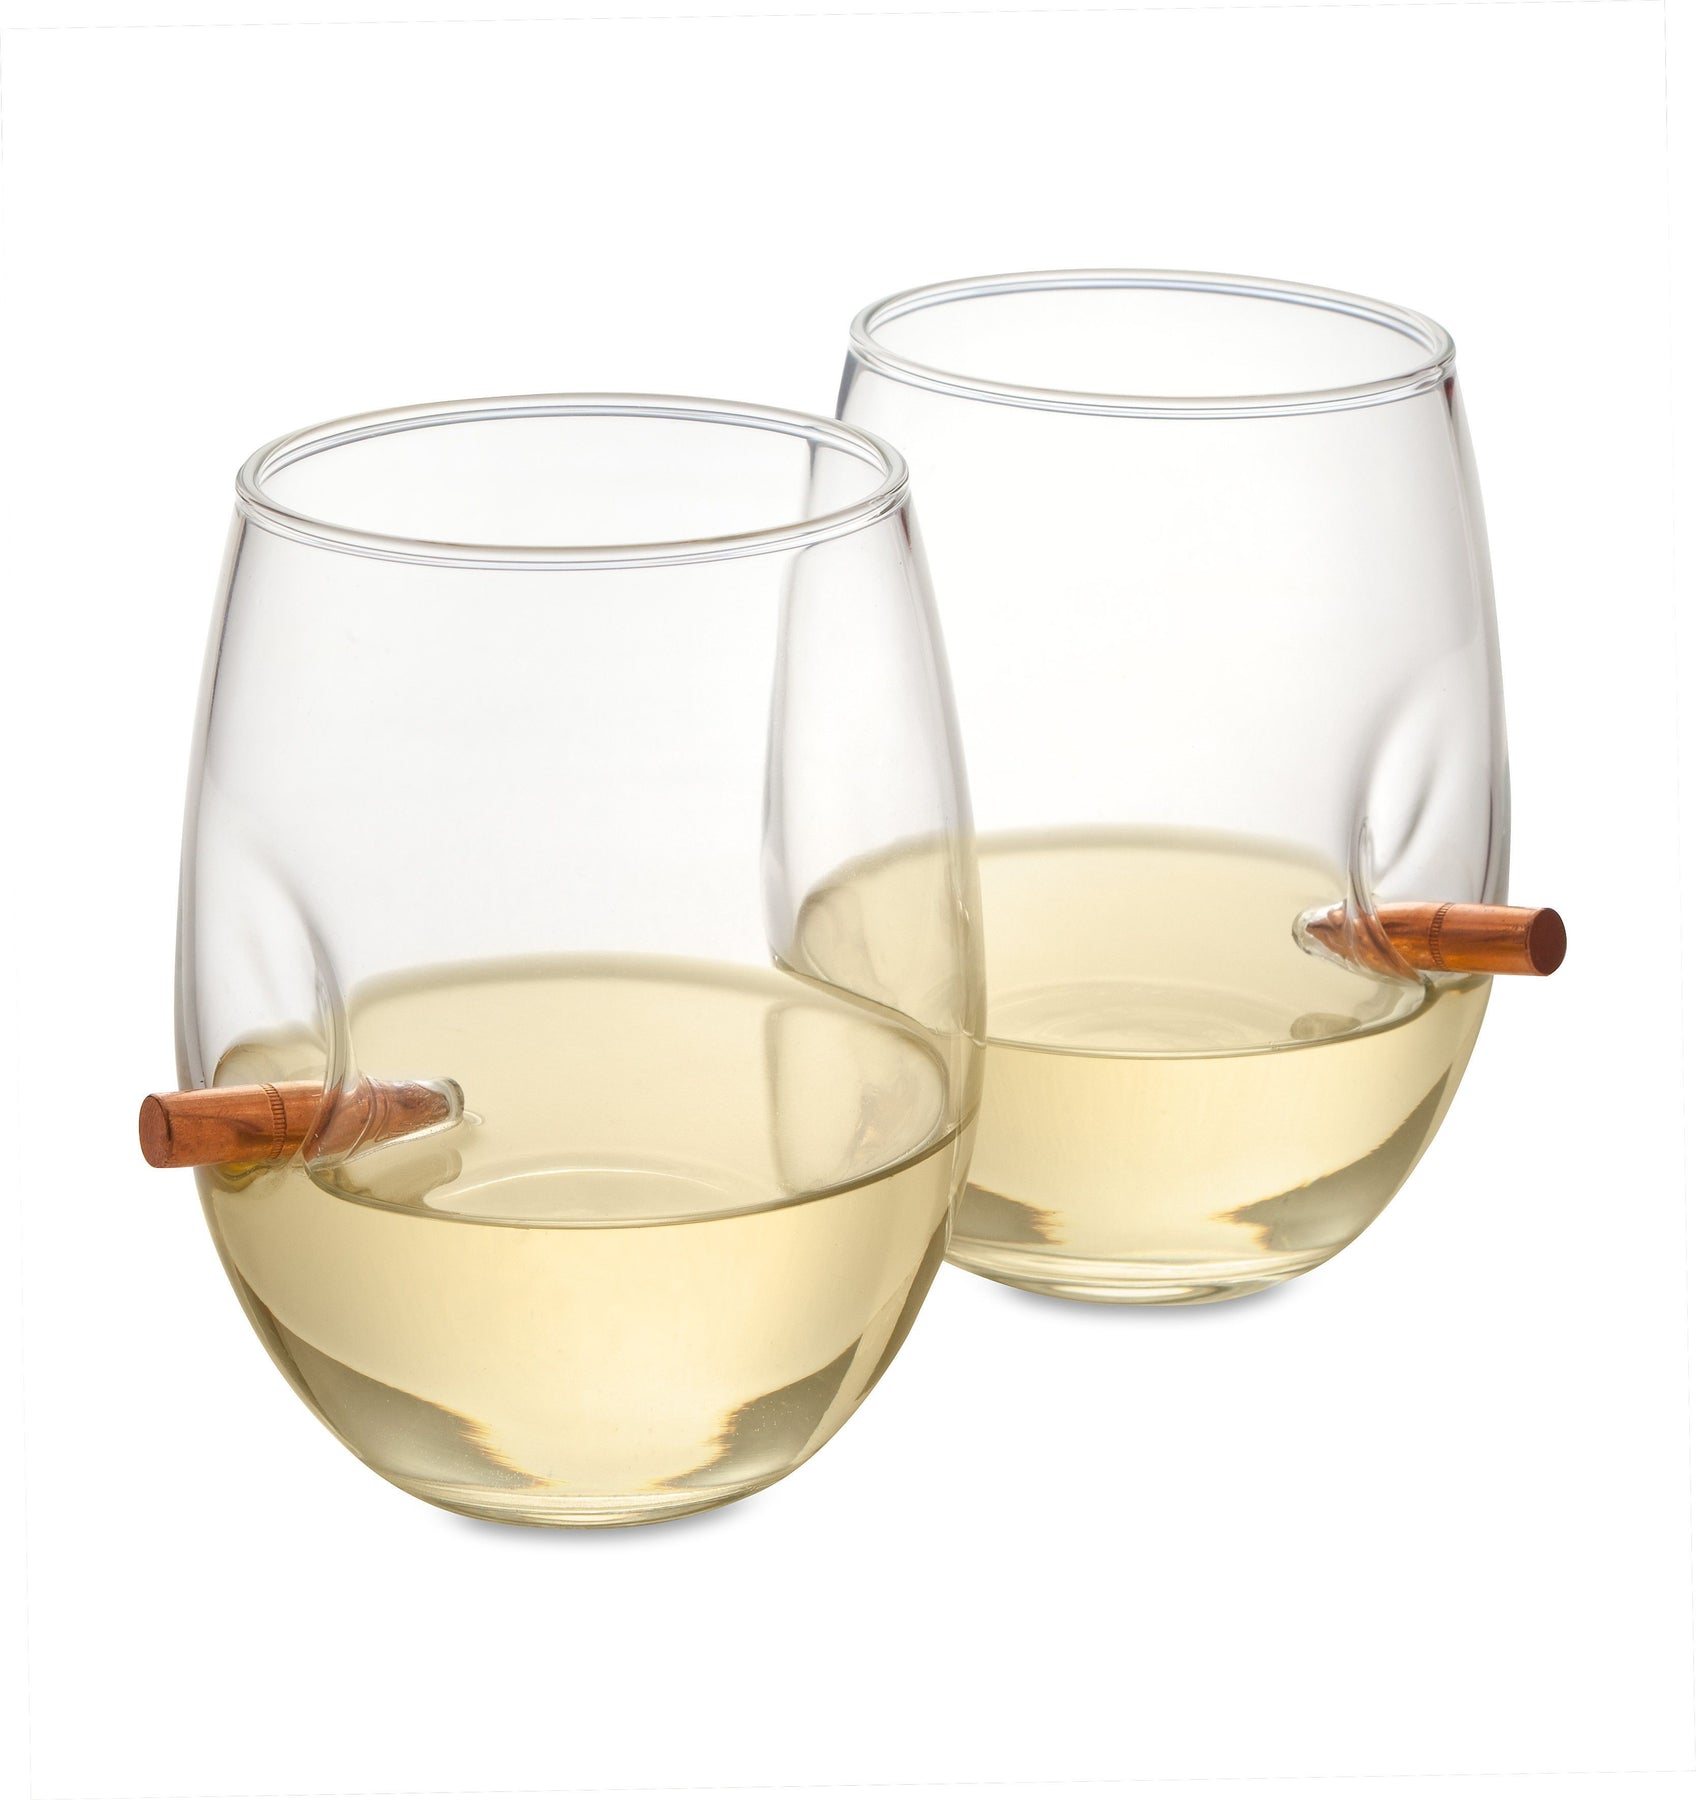 Personalised Set of 2 Red & White Wine Glass Custom Engraved 